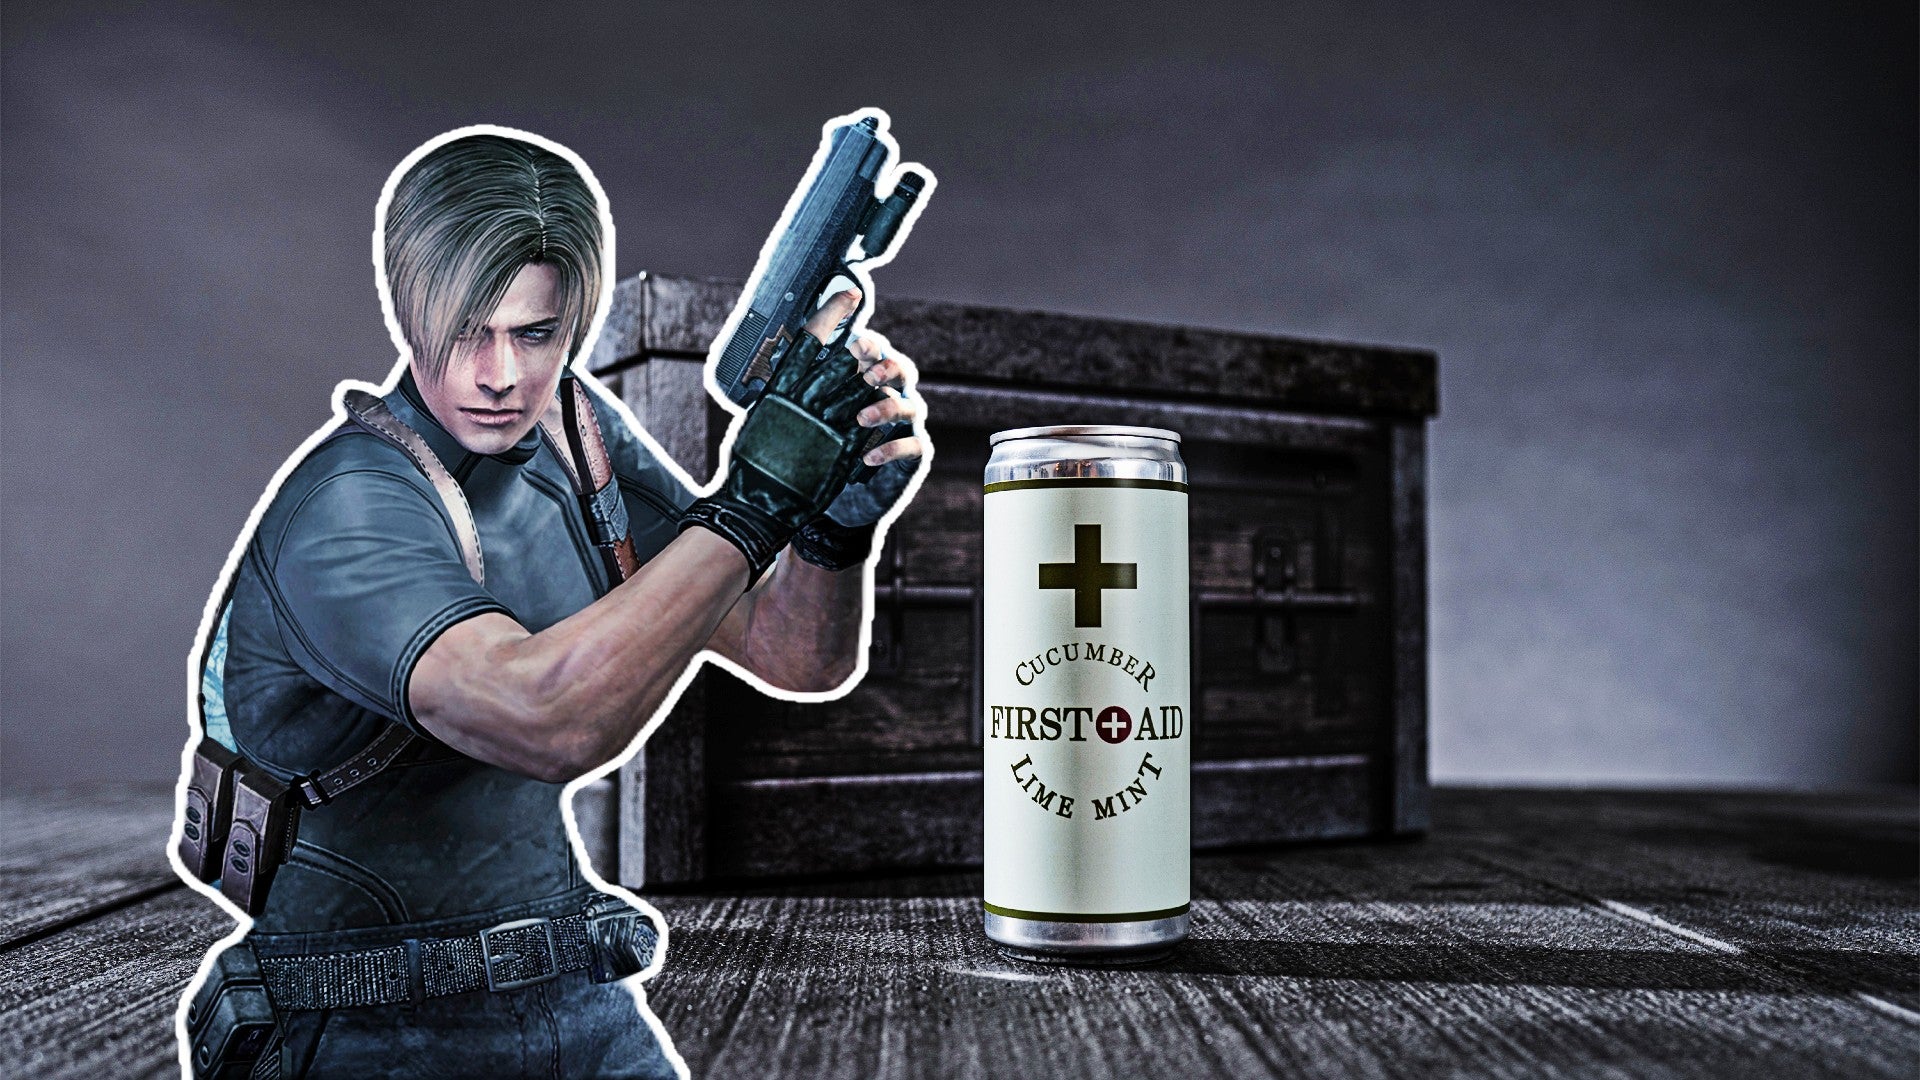 Resident-Evil-First-Aid-Drink-Collector-s-Box-f-r-200-Euro-versorgt-durstige-Zombie-J-ger